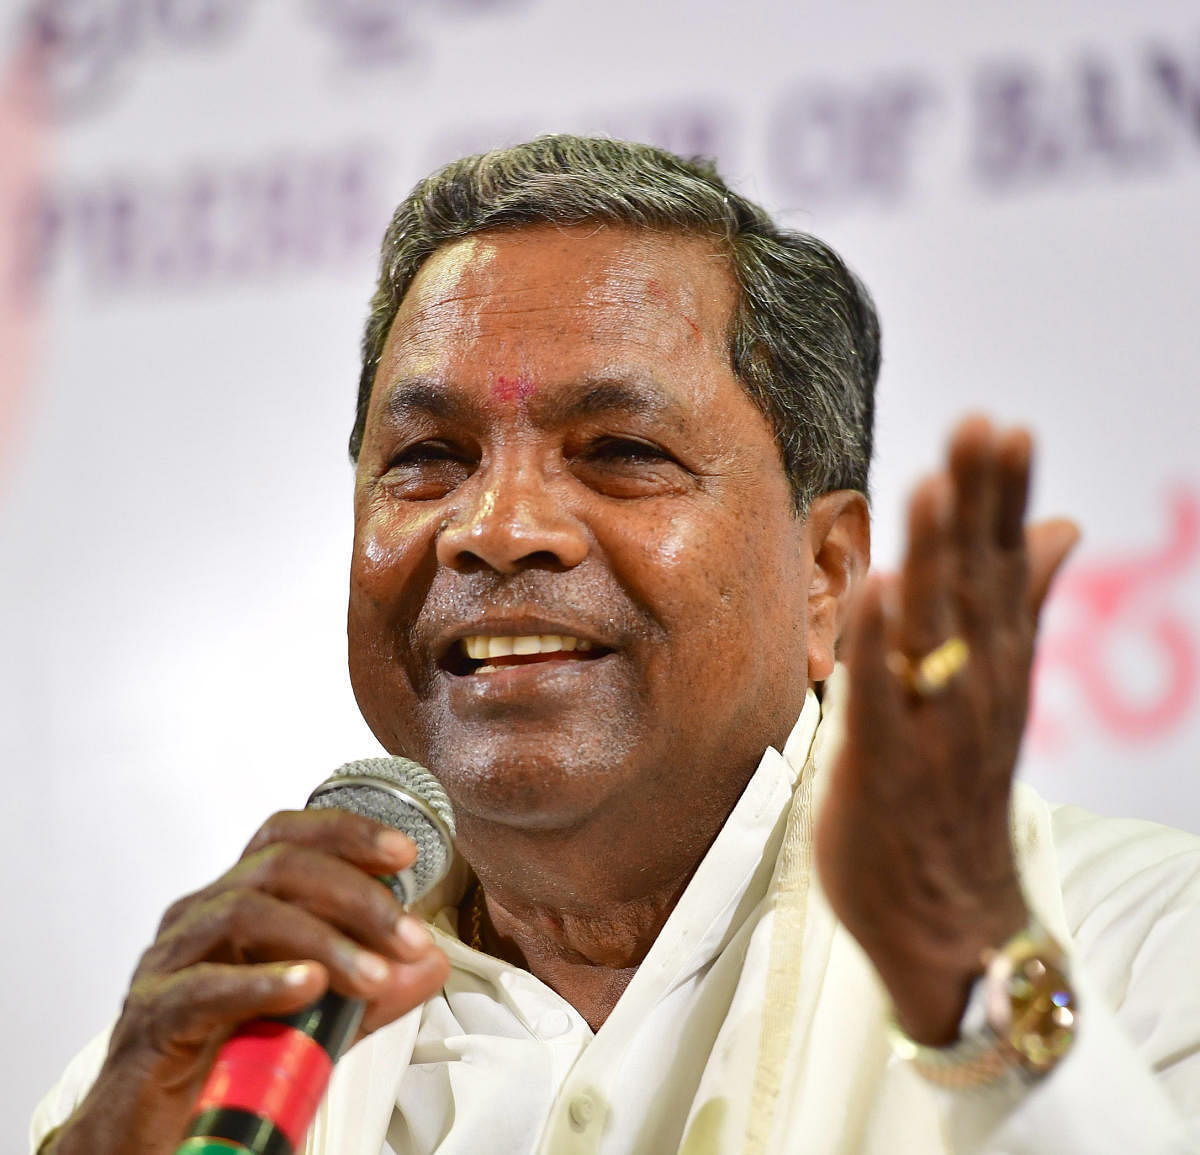 Siddaramaiah said that the JD(S) expressed its inclination to contest from some seats represented by Congress.